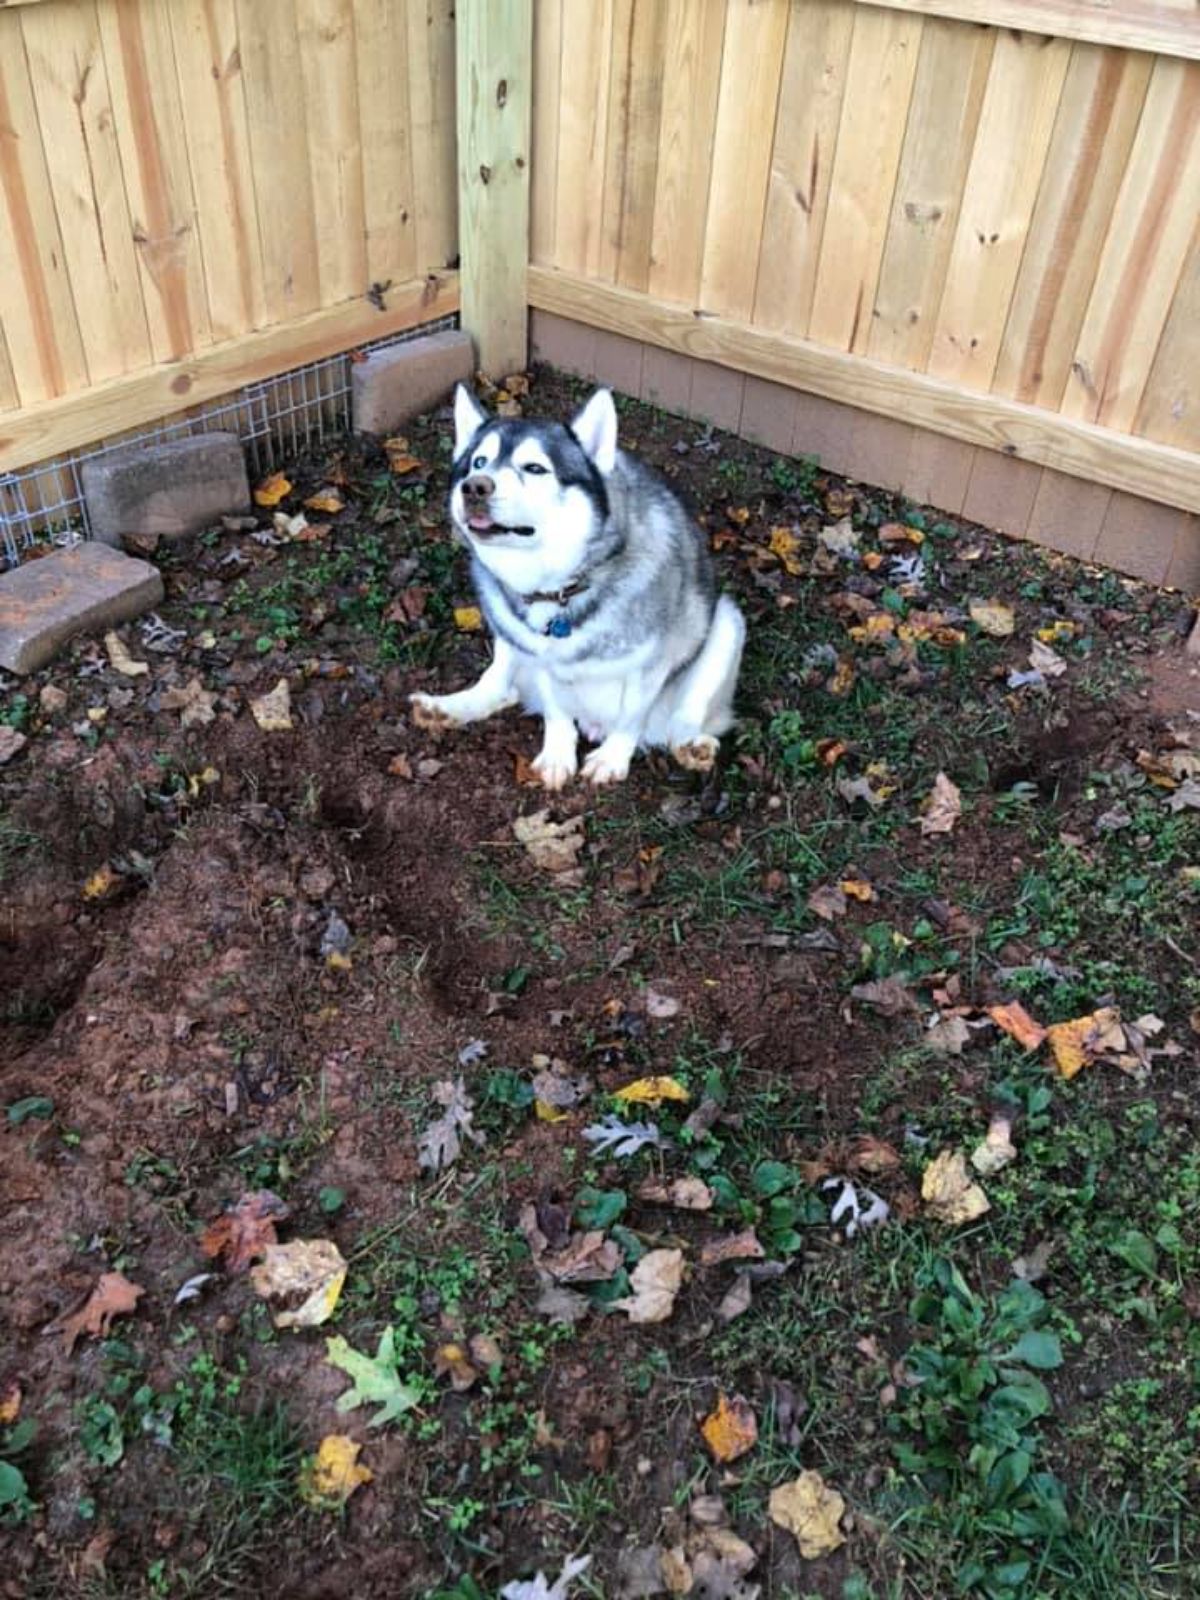 black and white husky sitting on the ground in a garden with the front legs placed between the back legs and the tongue sticking out slightly